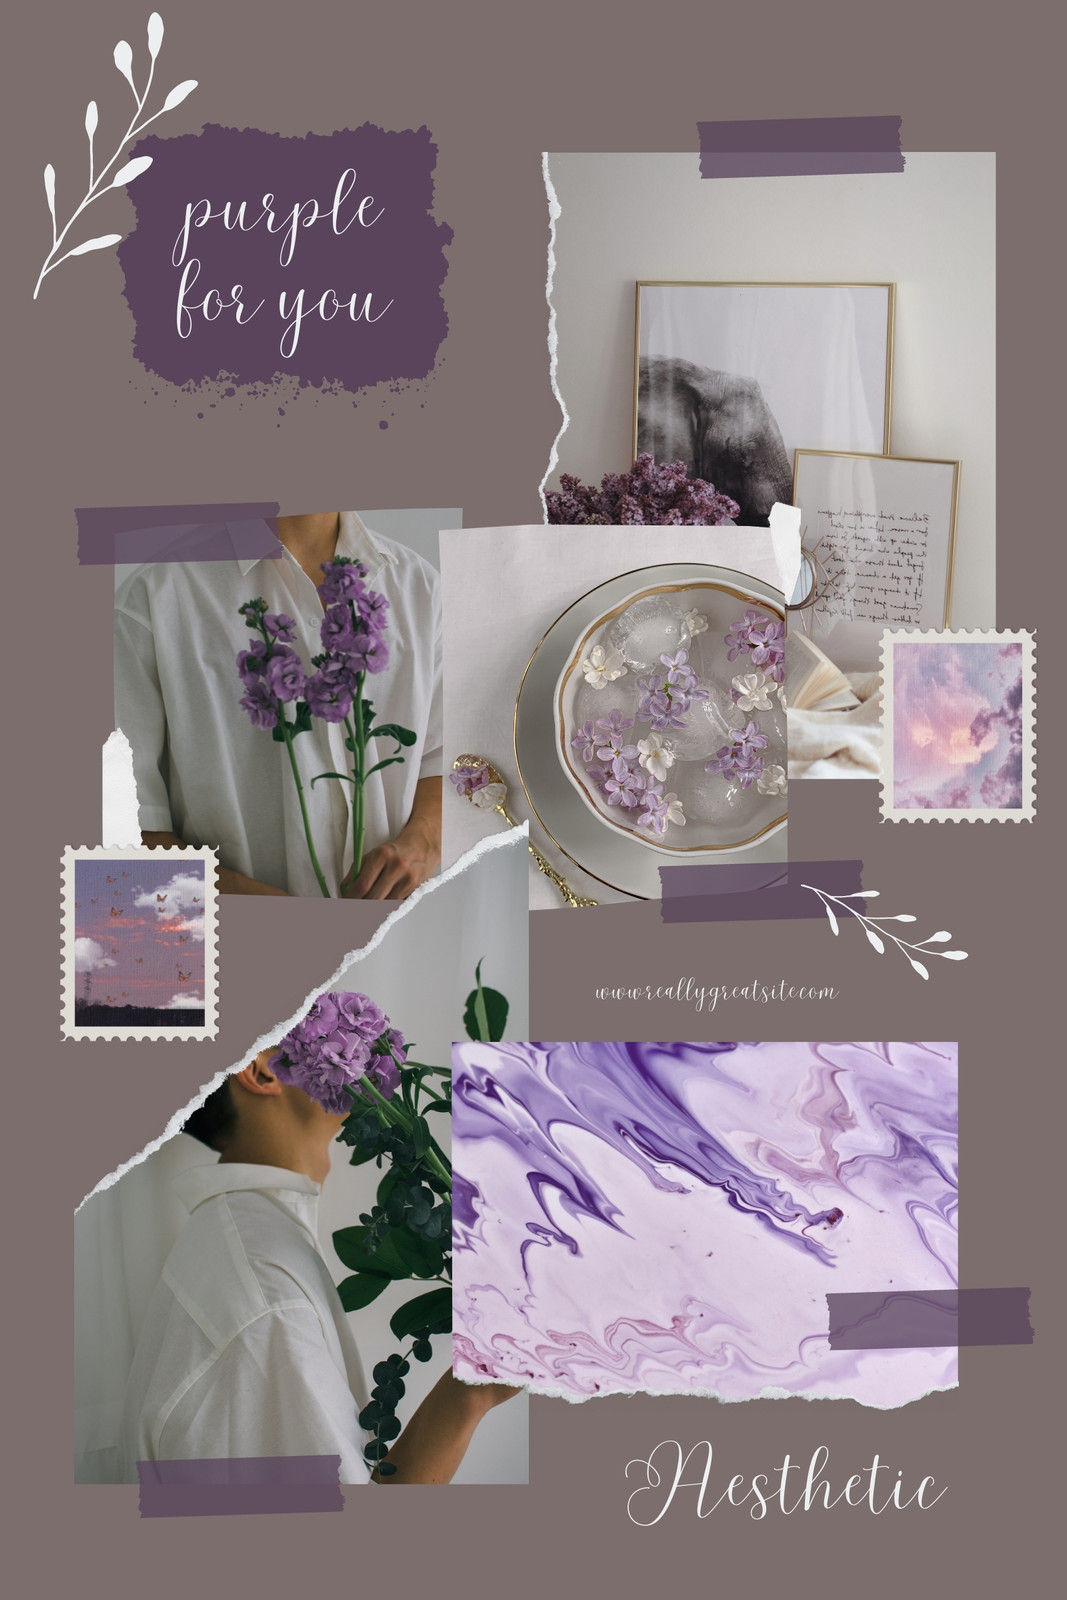 Download Purple Aesthetic Collage Love Yourself Wallpaper